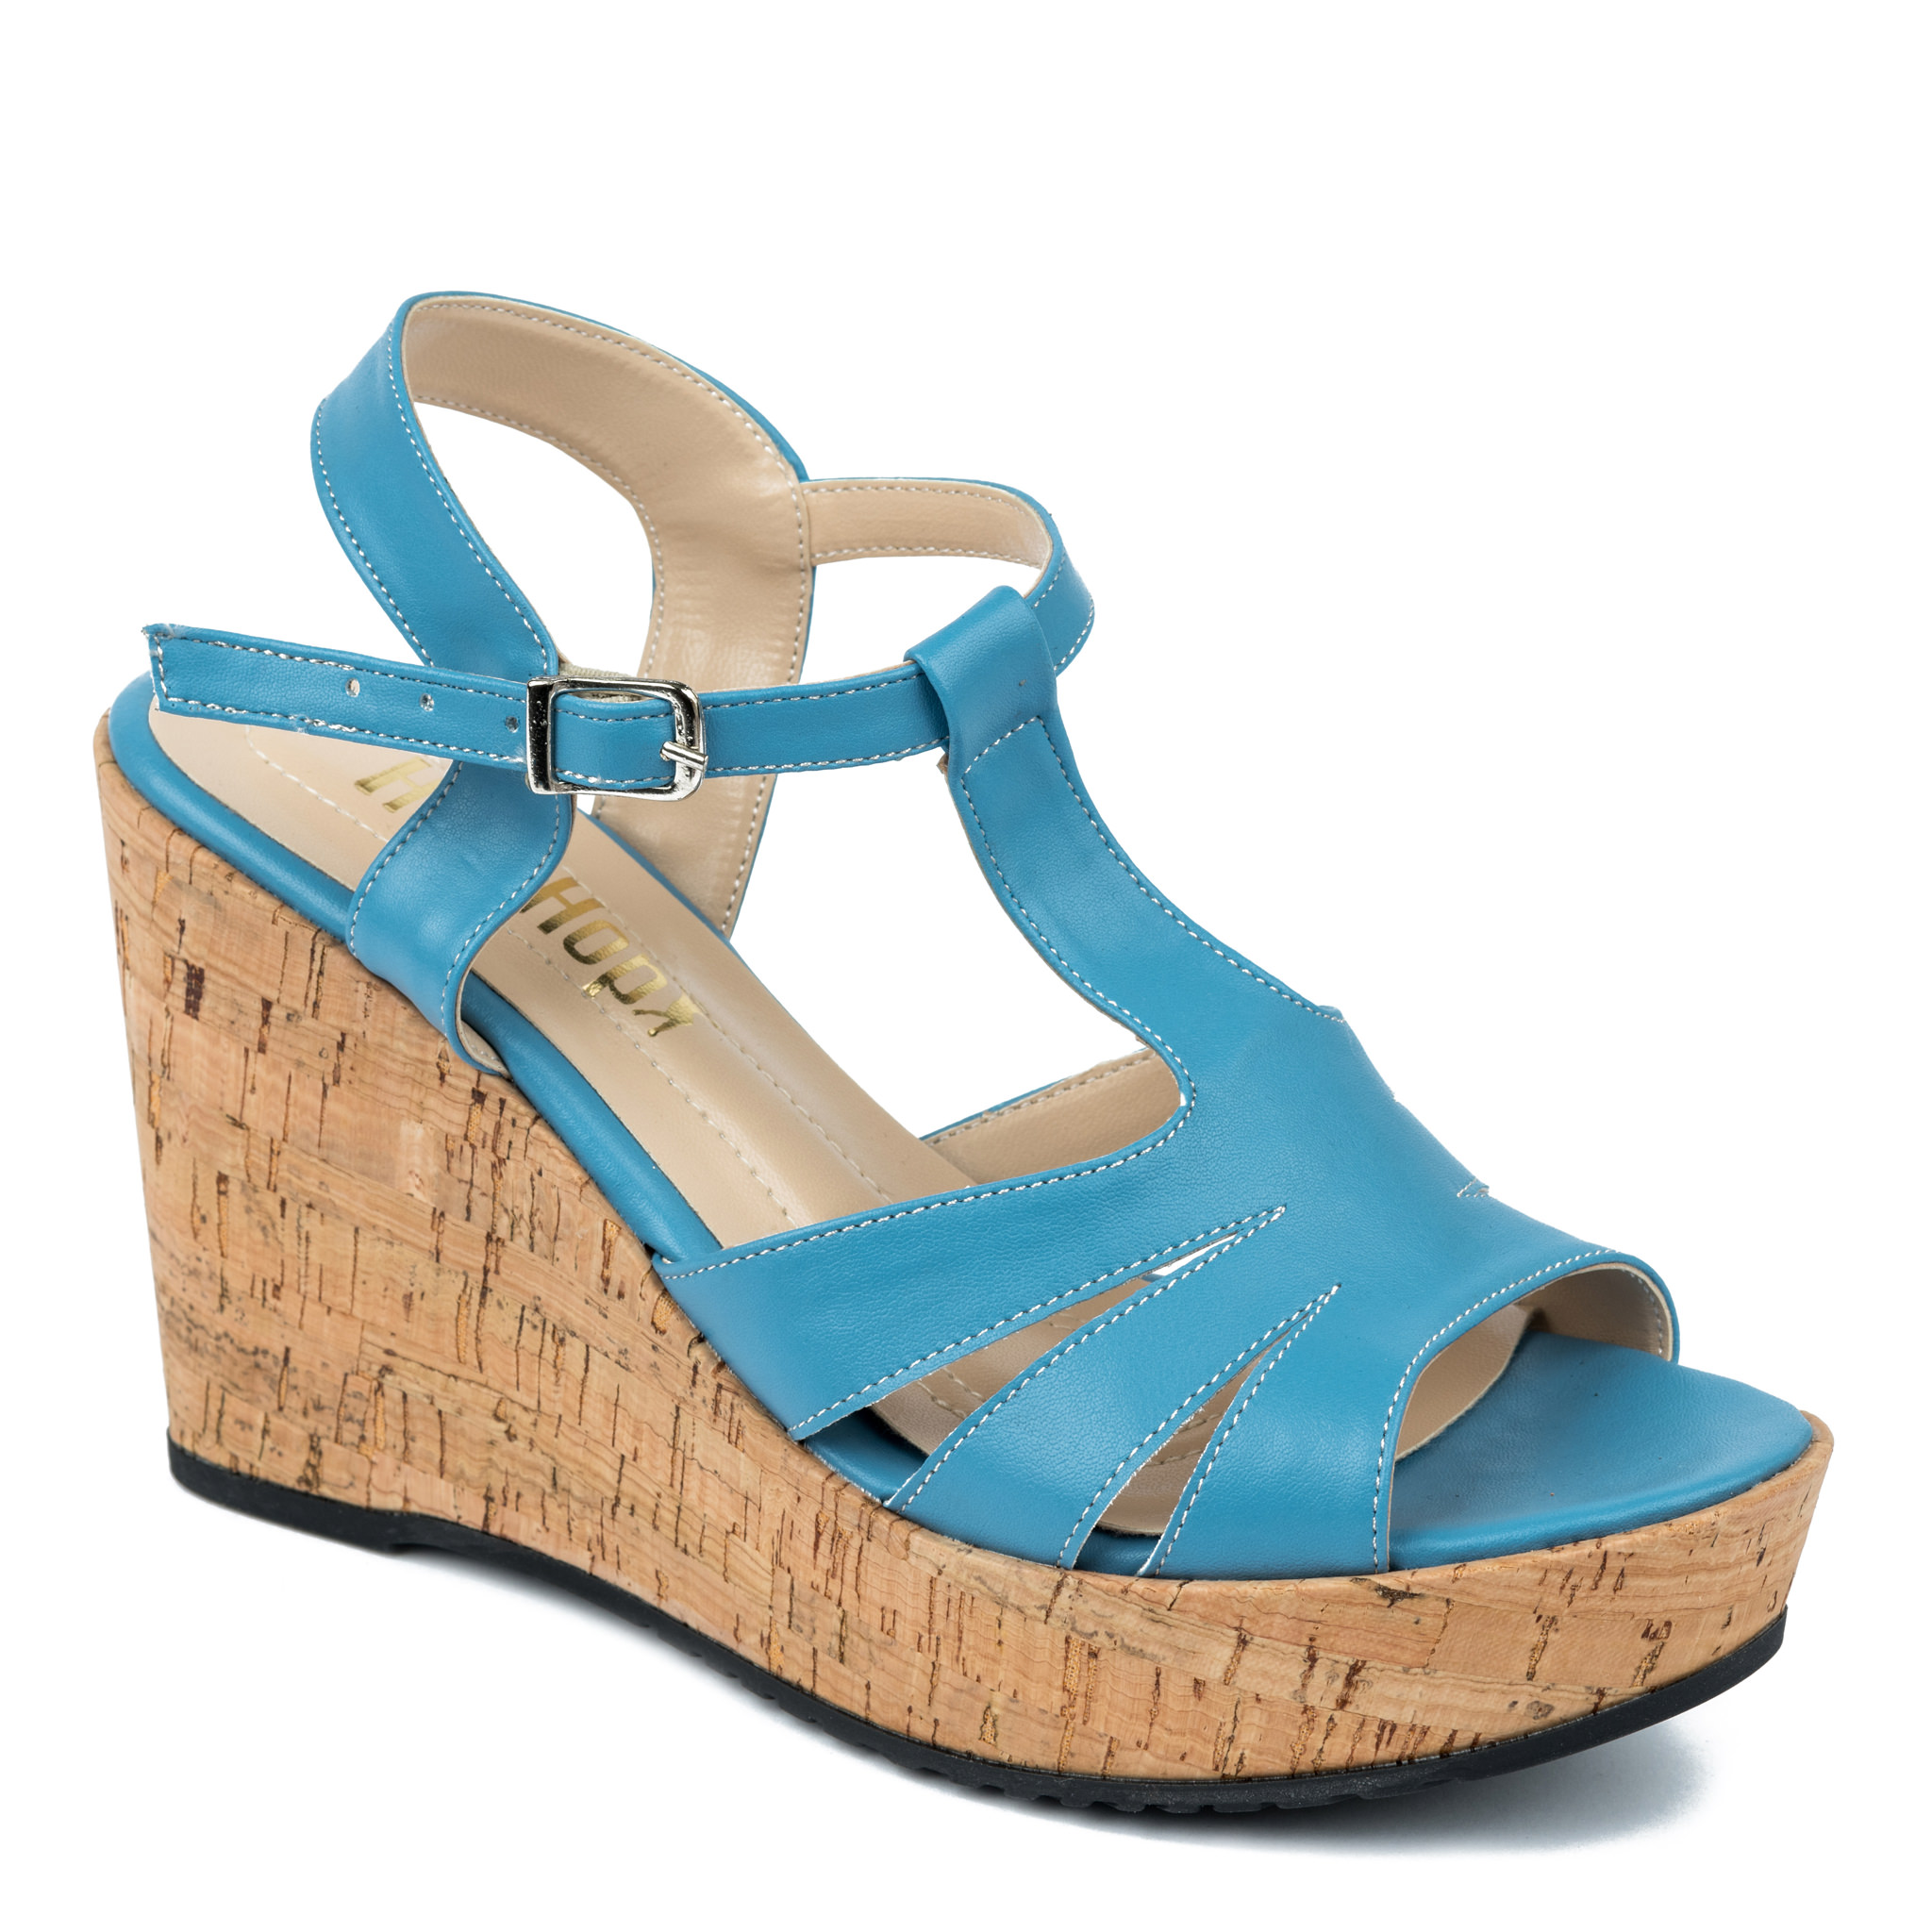 WEDGE SANDALS WITH BELTS - BLUE